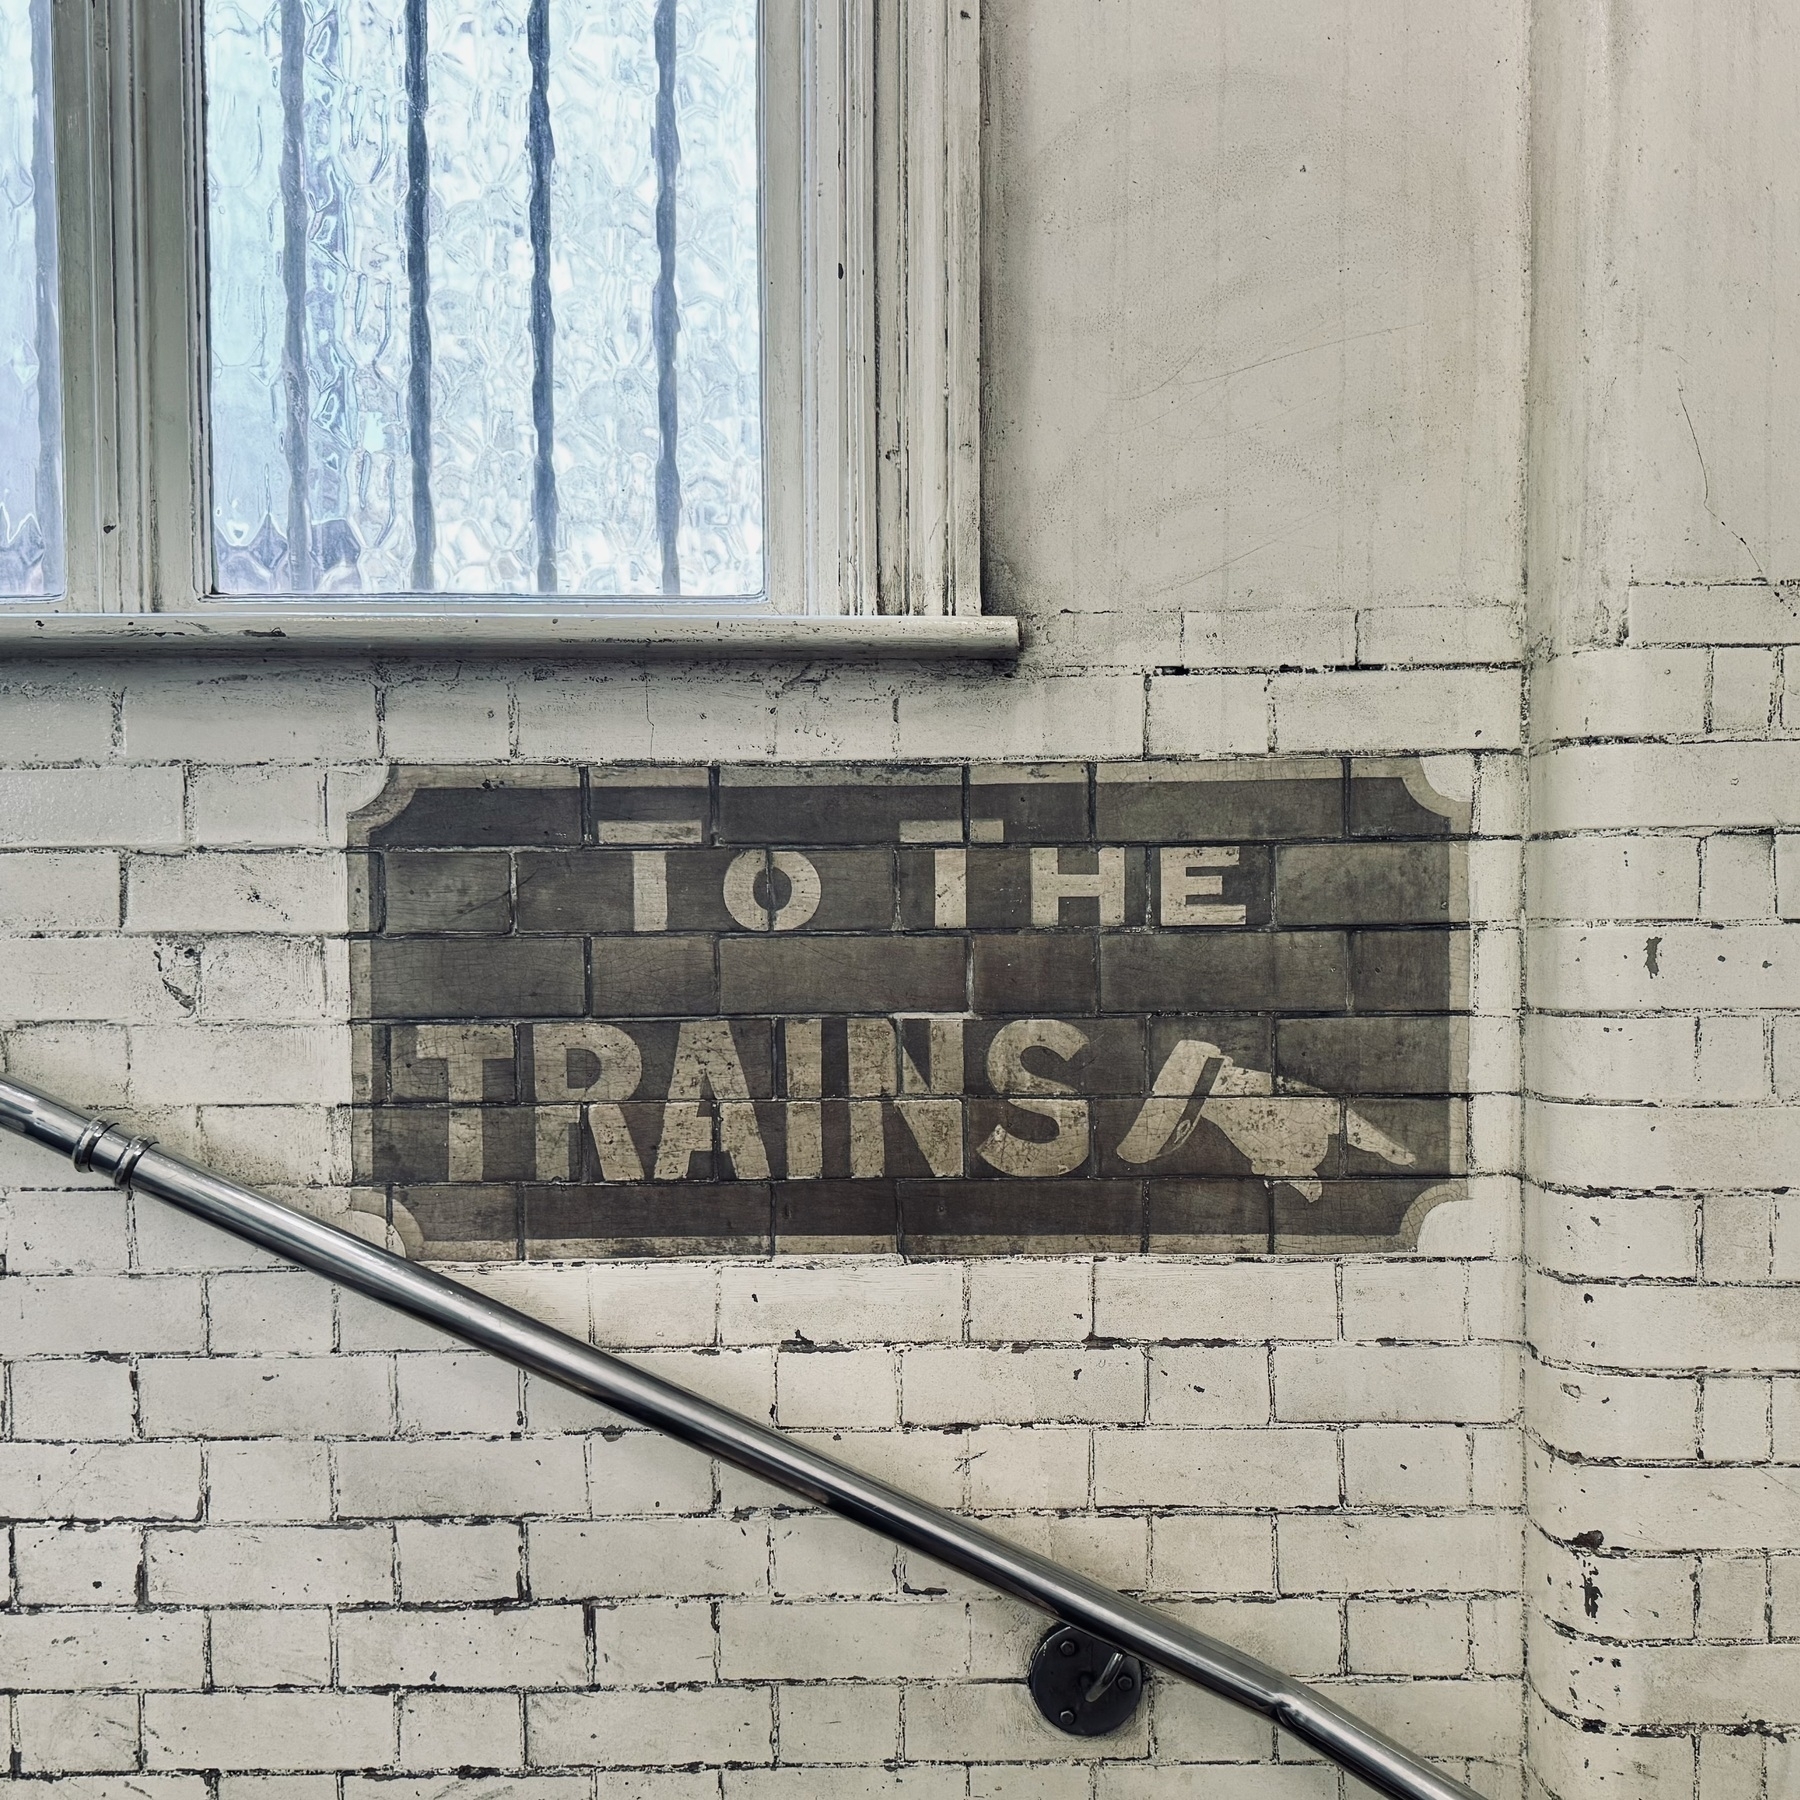 A sign painted on brickwork that says “to the trains”.